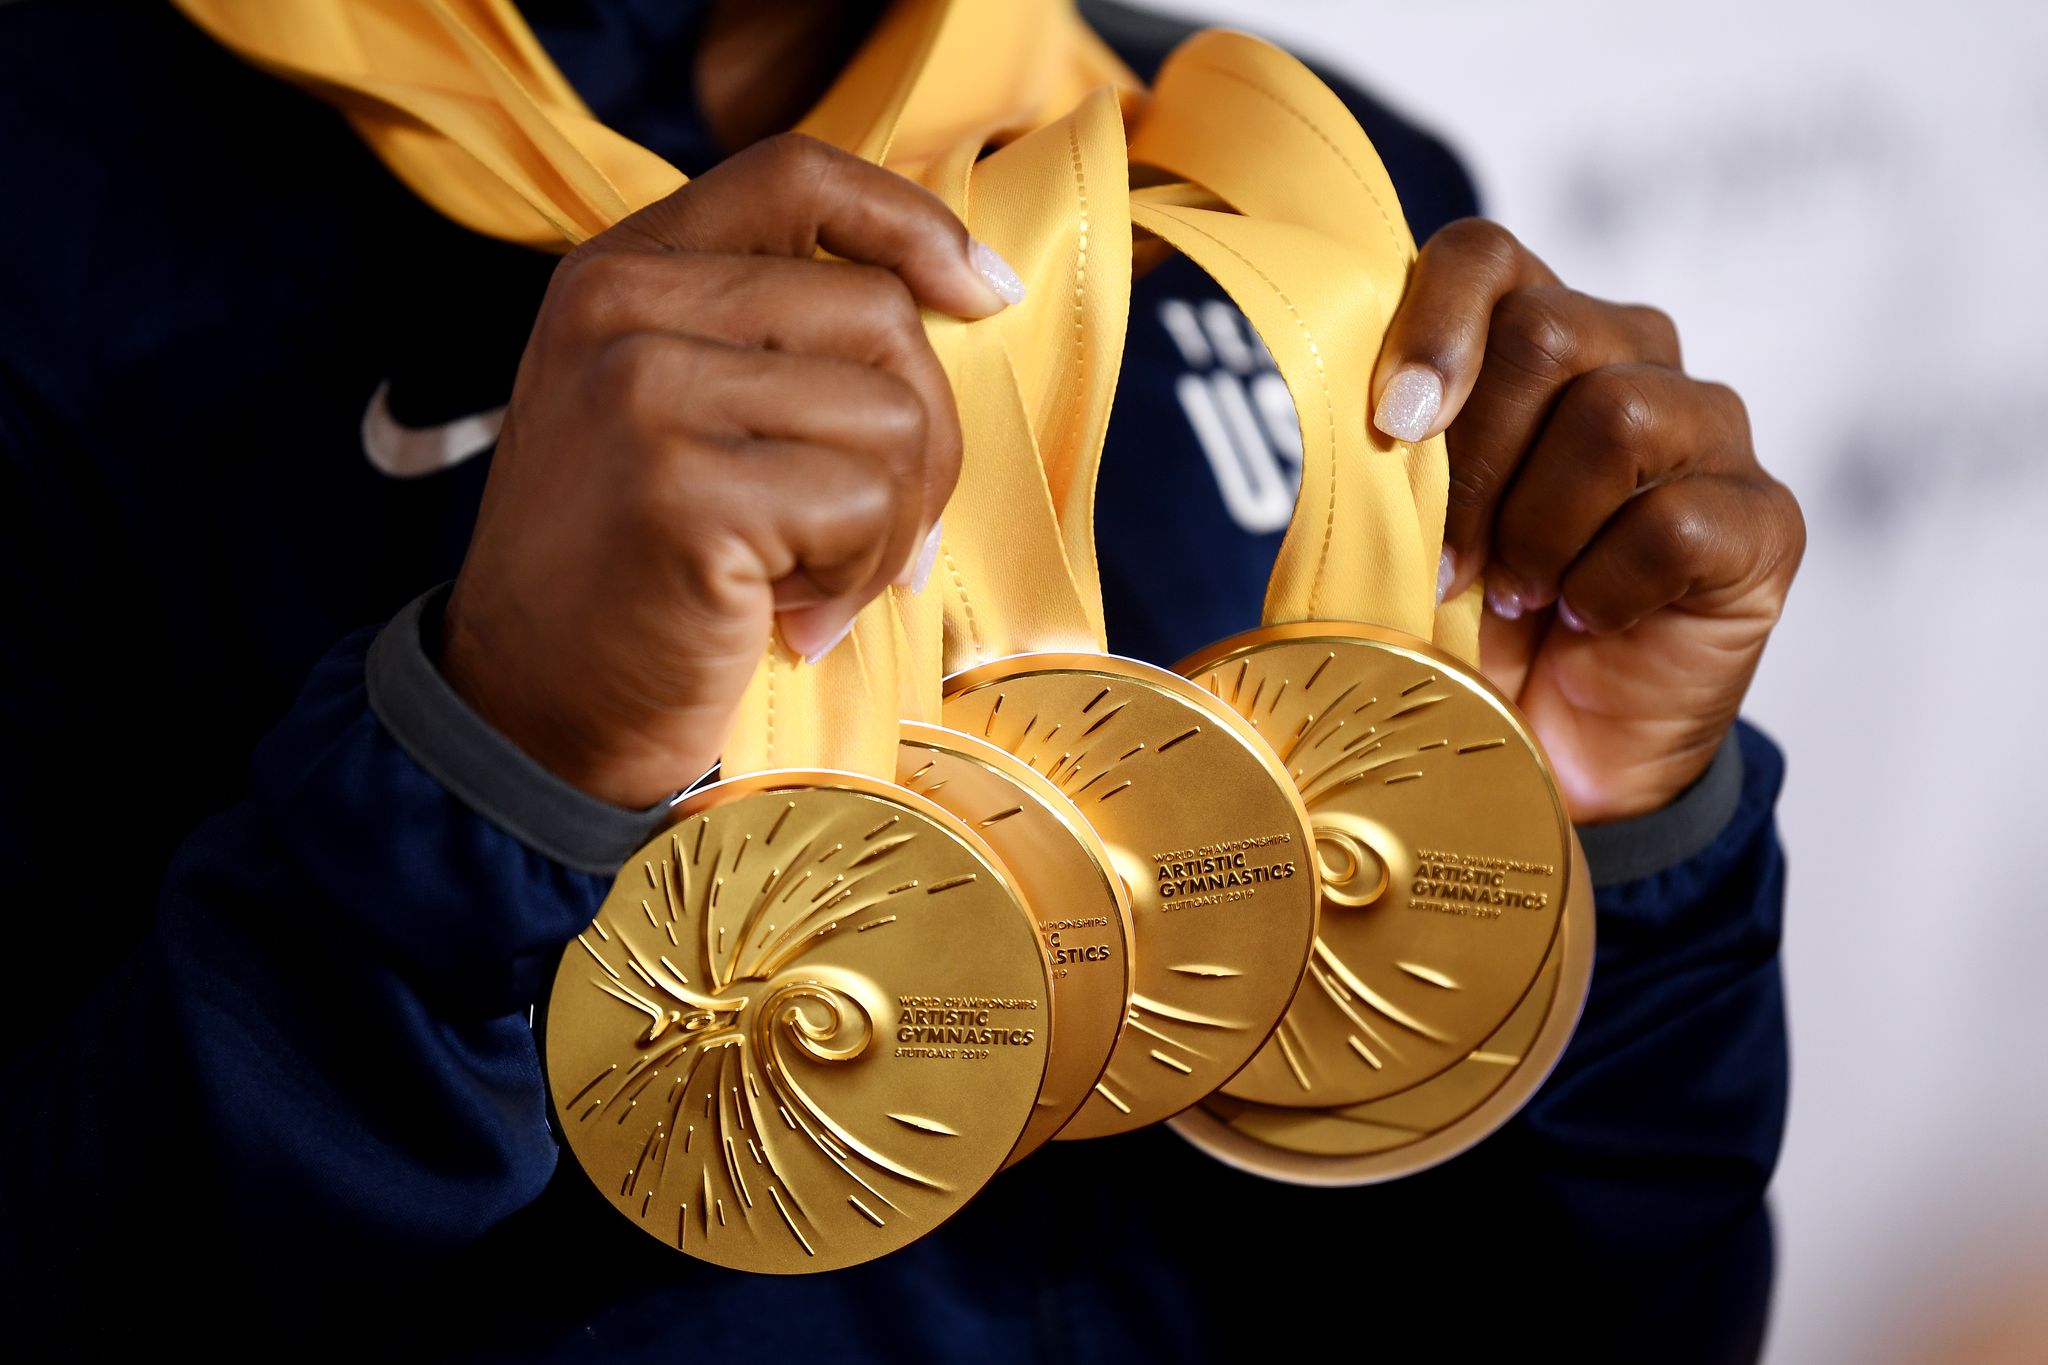 Gold medals on a person. | Source: Shutterstock